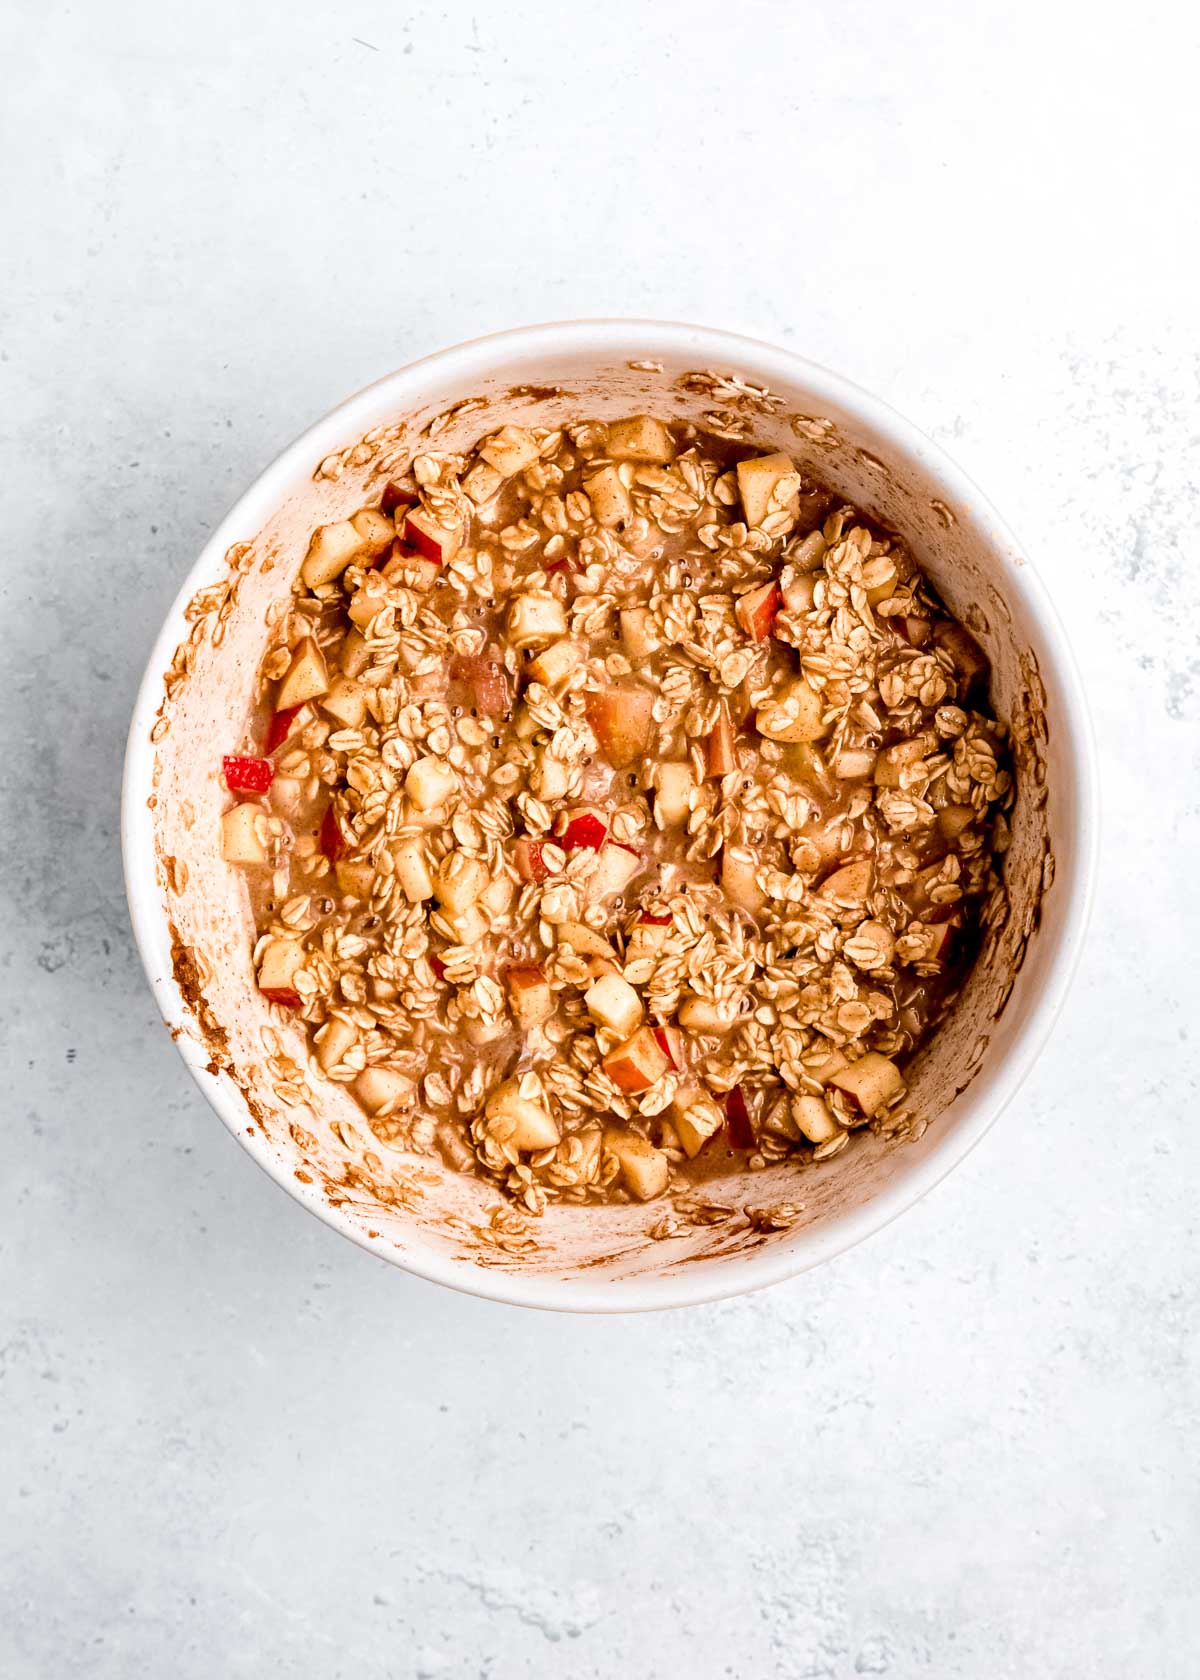 apples, oats, maple syrup, almond milk, apple butter, and other oatmeal ingredients mixed in a white bowl